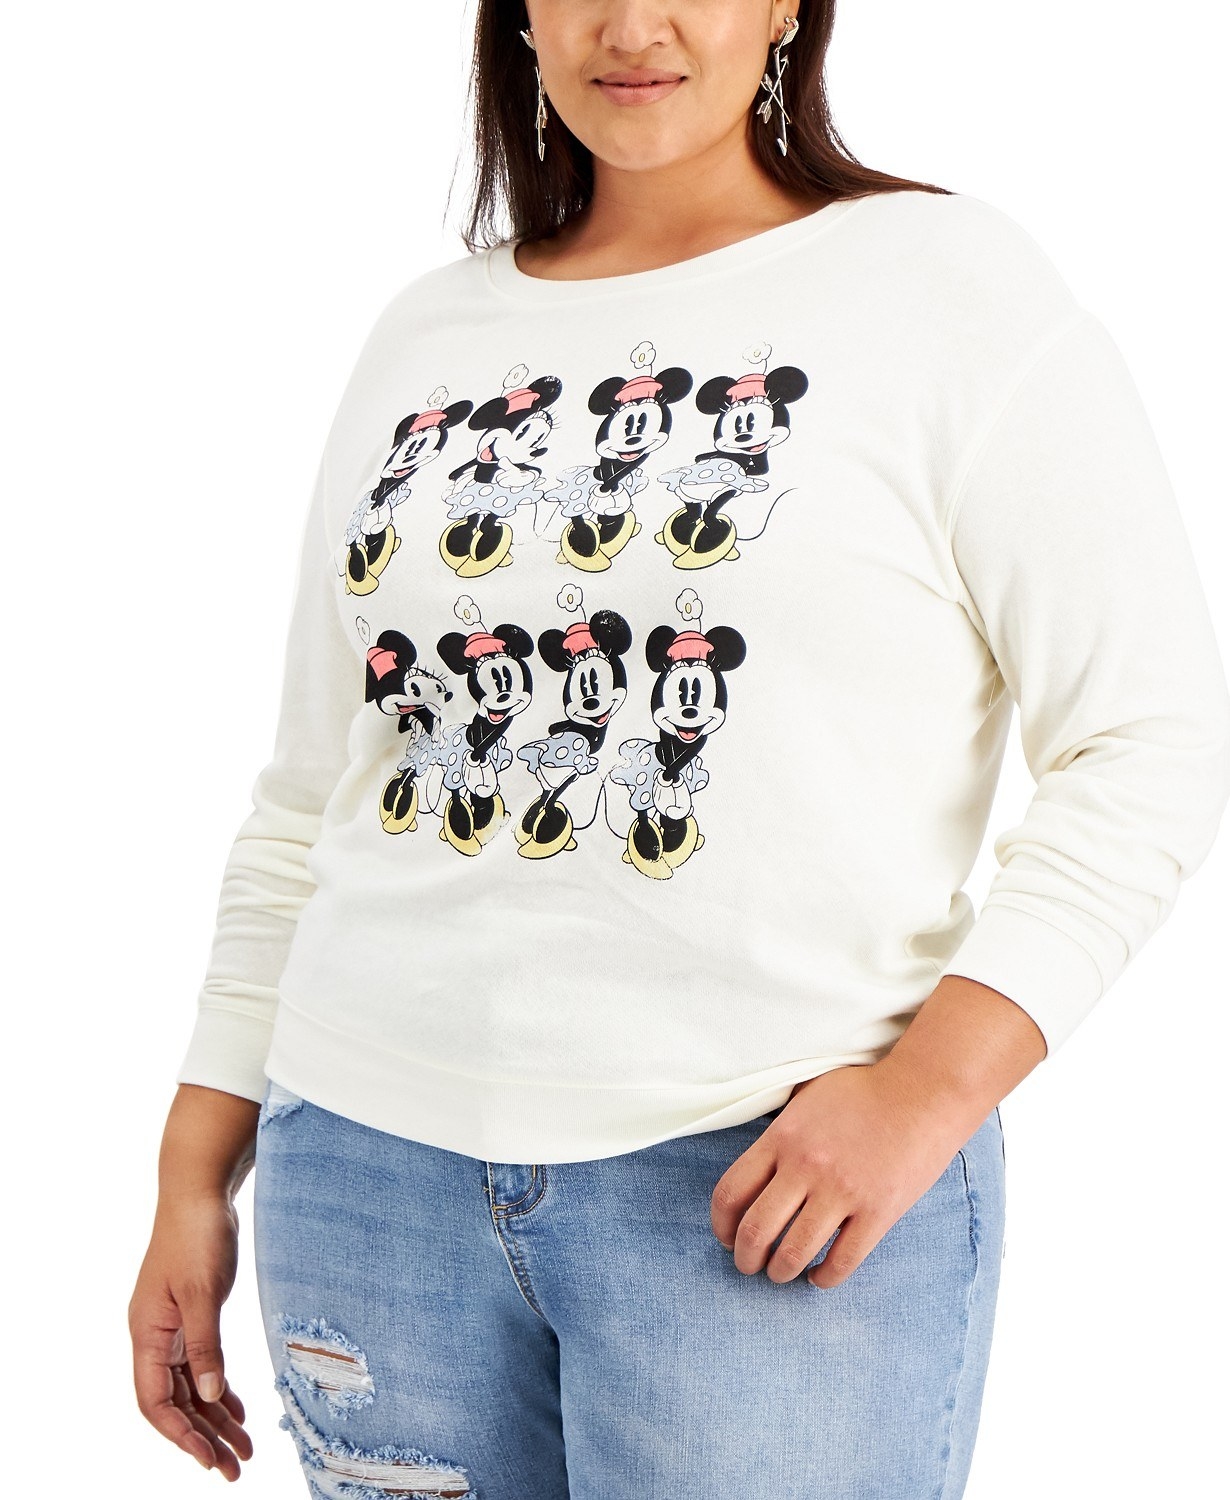 Model wearing white sweatshirt with Minnie Mouse print